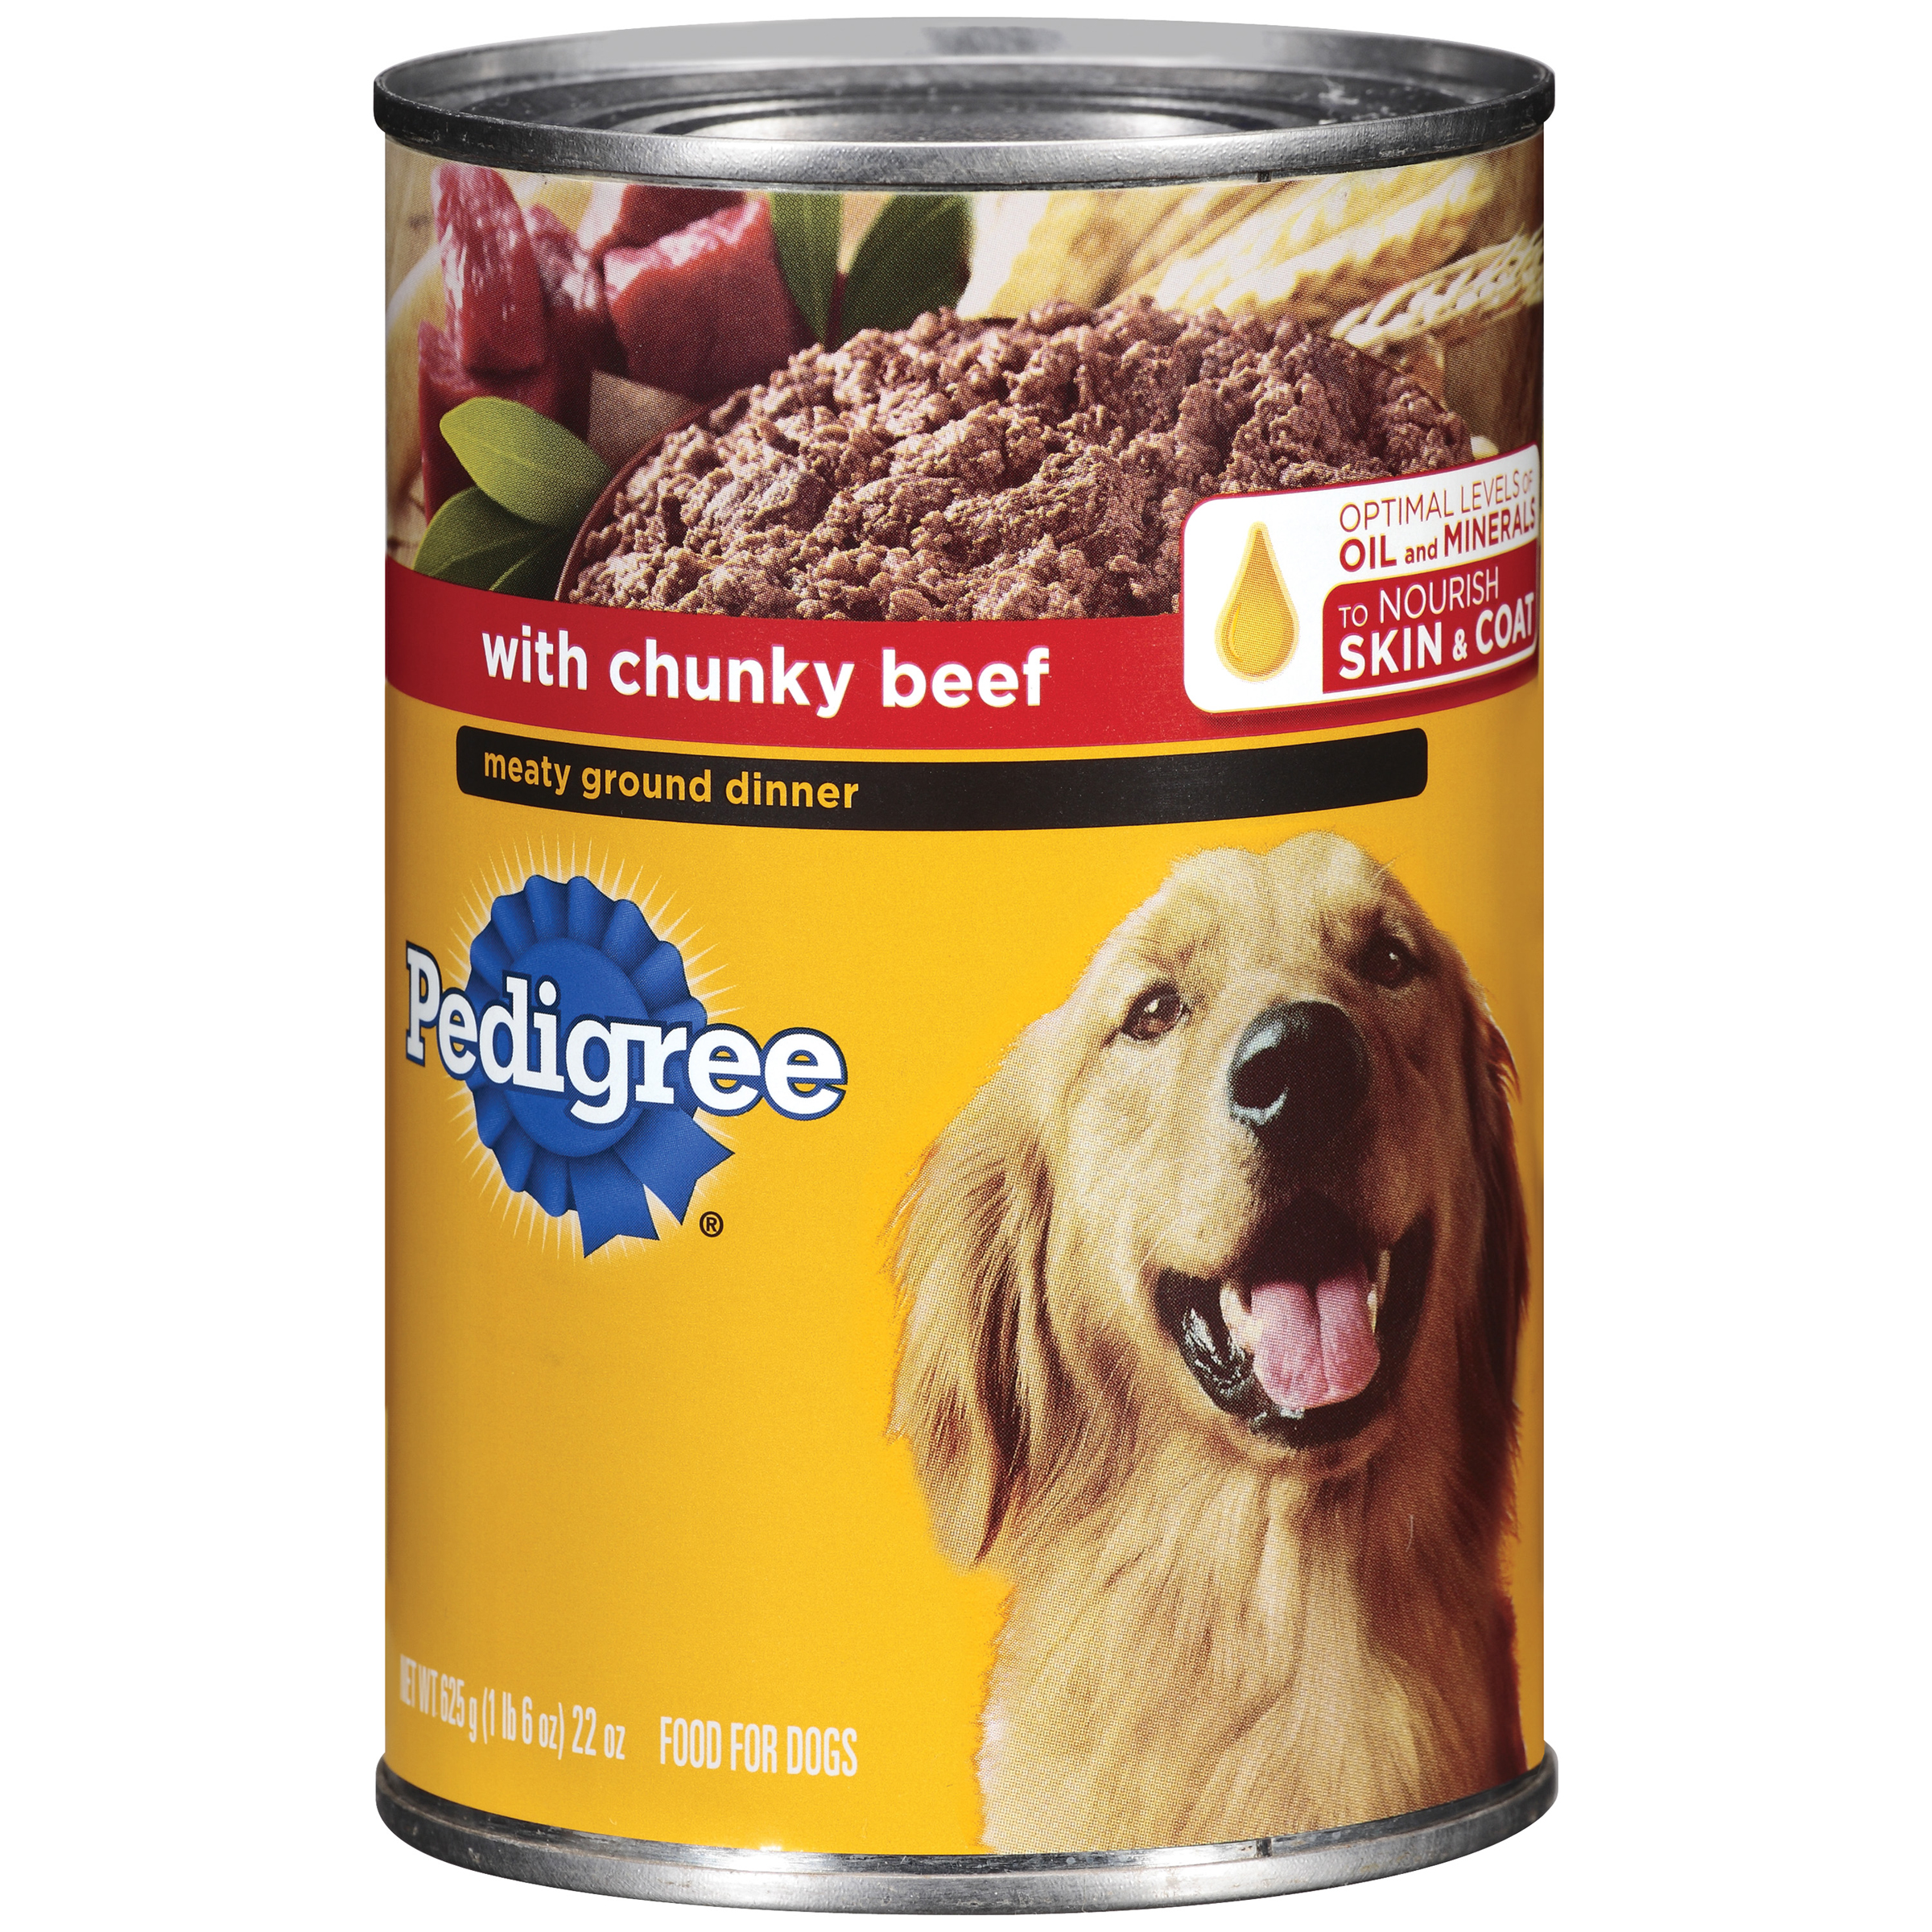 Pedigree Food for Adult Dogs, Traditional Ground Dinner with Chunky Beef, 22 oz (625 g)